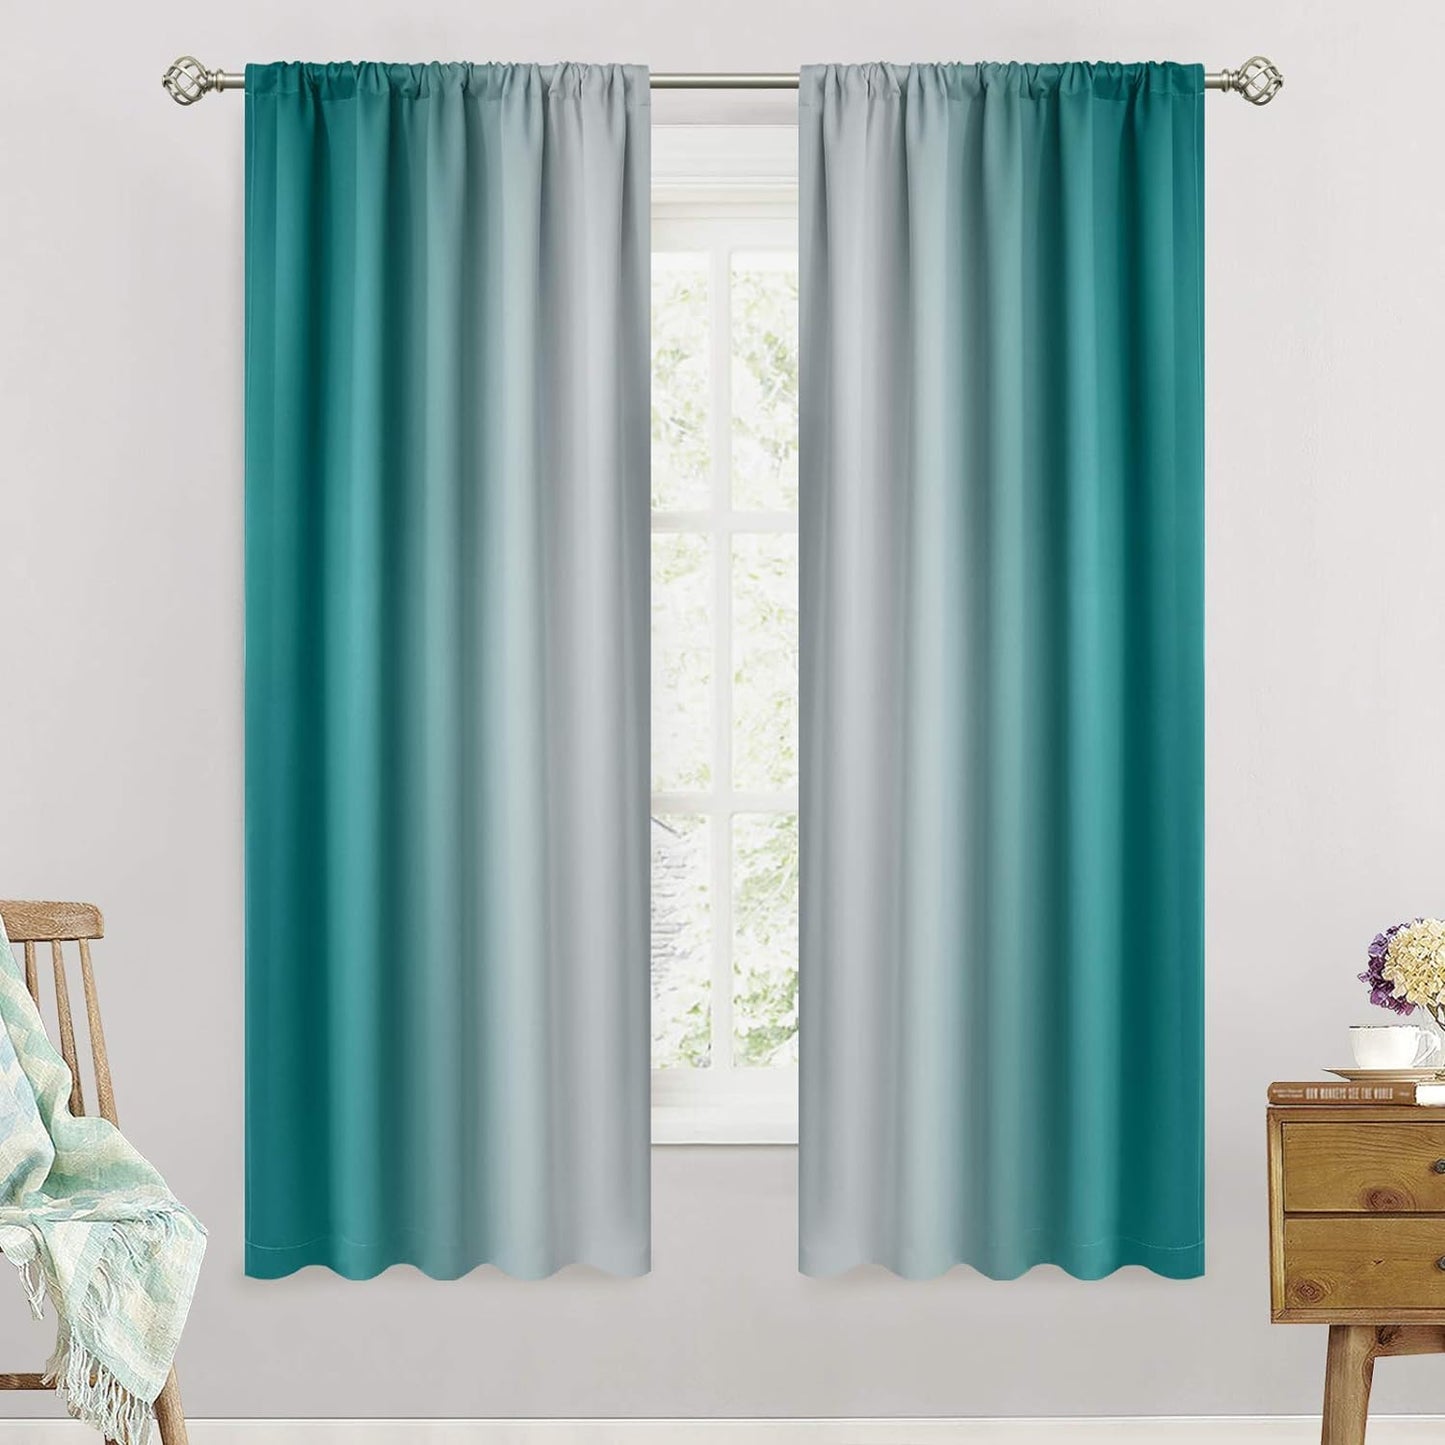 Simplehome Ombre Room Darkening Curtains for Bedroom, Light Blocking Gradient Purple to Greyish White Thermal Insulated Rod Pocket Window Curtains Drapes for Living Room,2 Panels, 52X84 Inches Length  SimpleHome Teal 52W X 63L / 2 Panels 